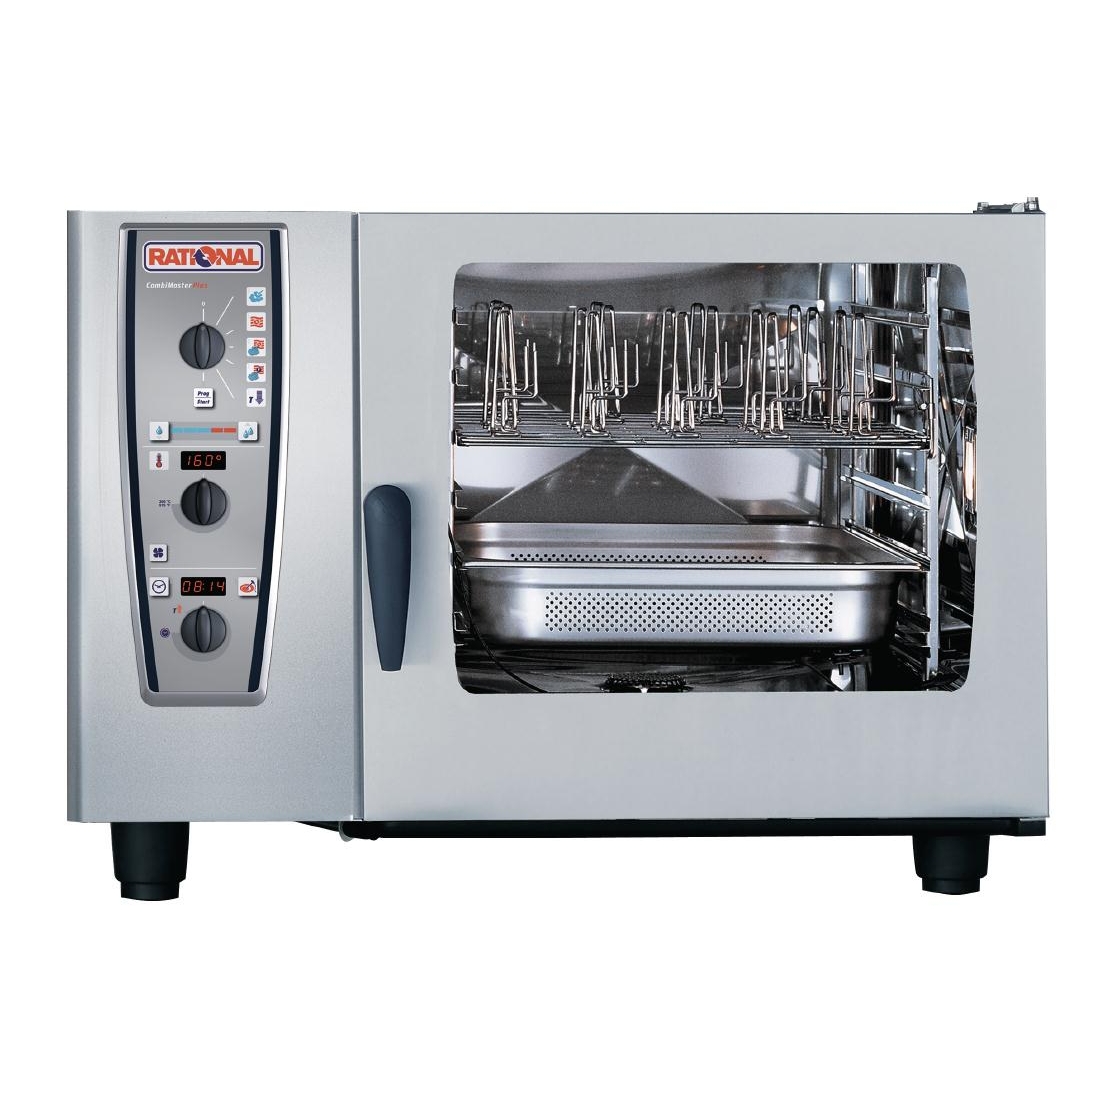 Rational Combimaster Plus Oven 62 Electric